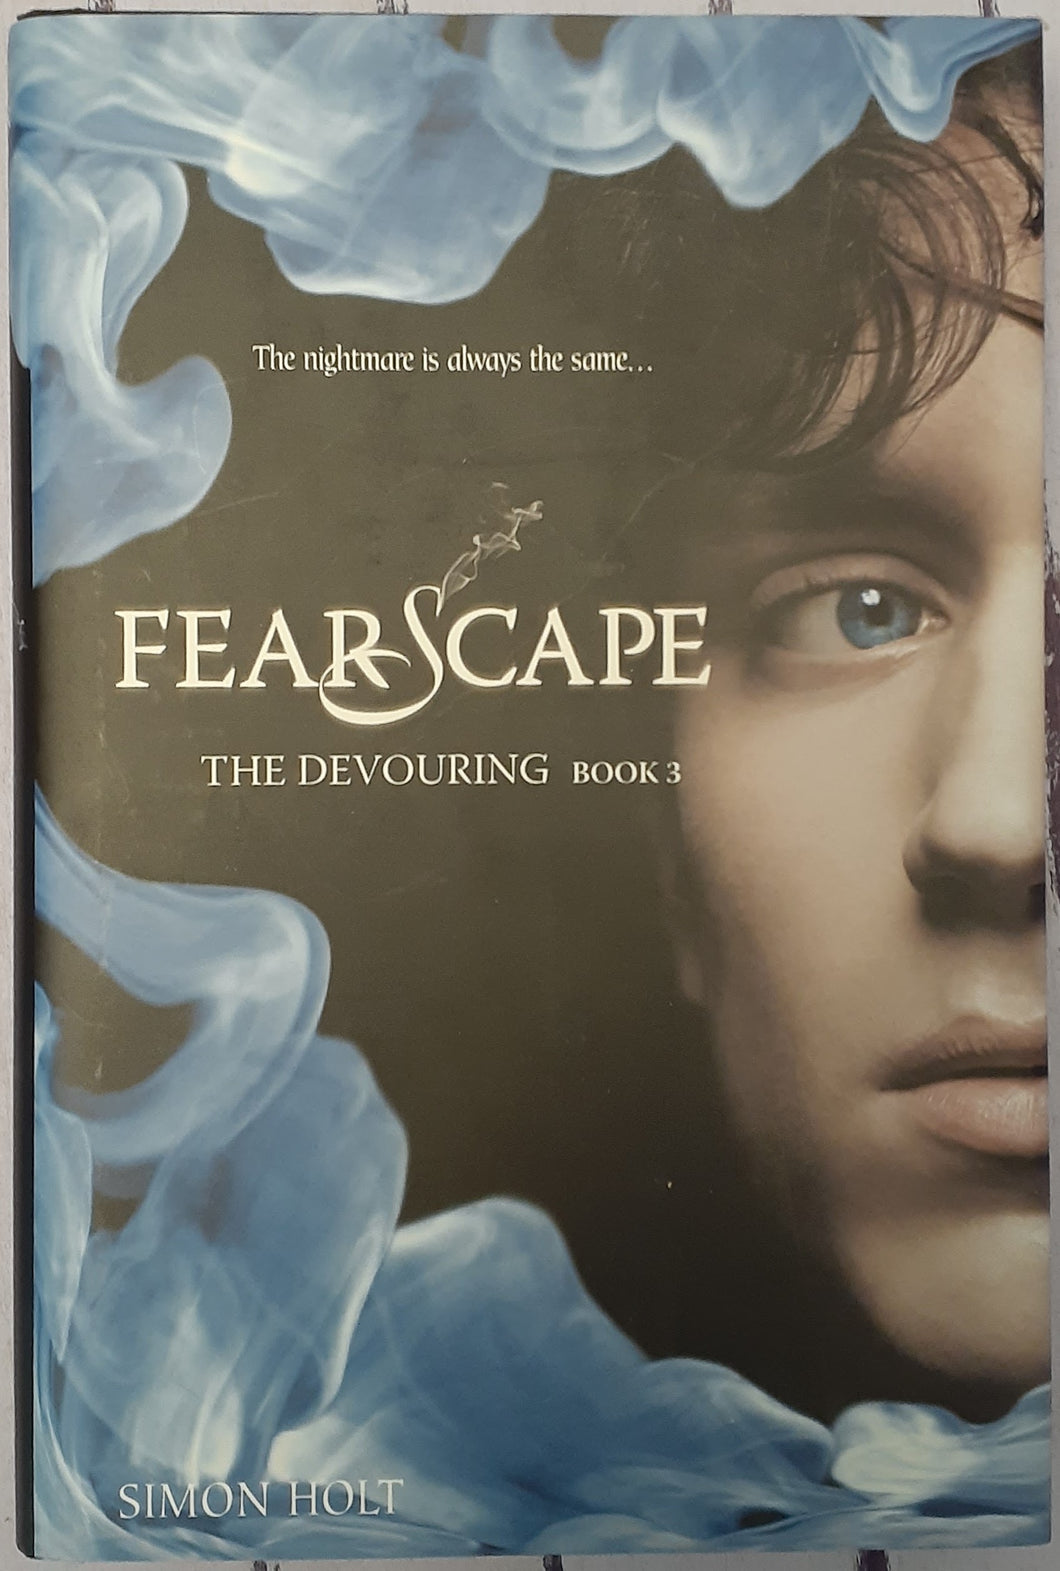 Fearscape - The Devouring Book 3